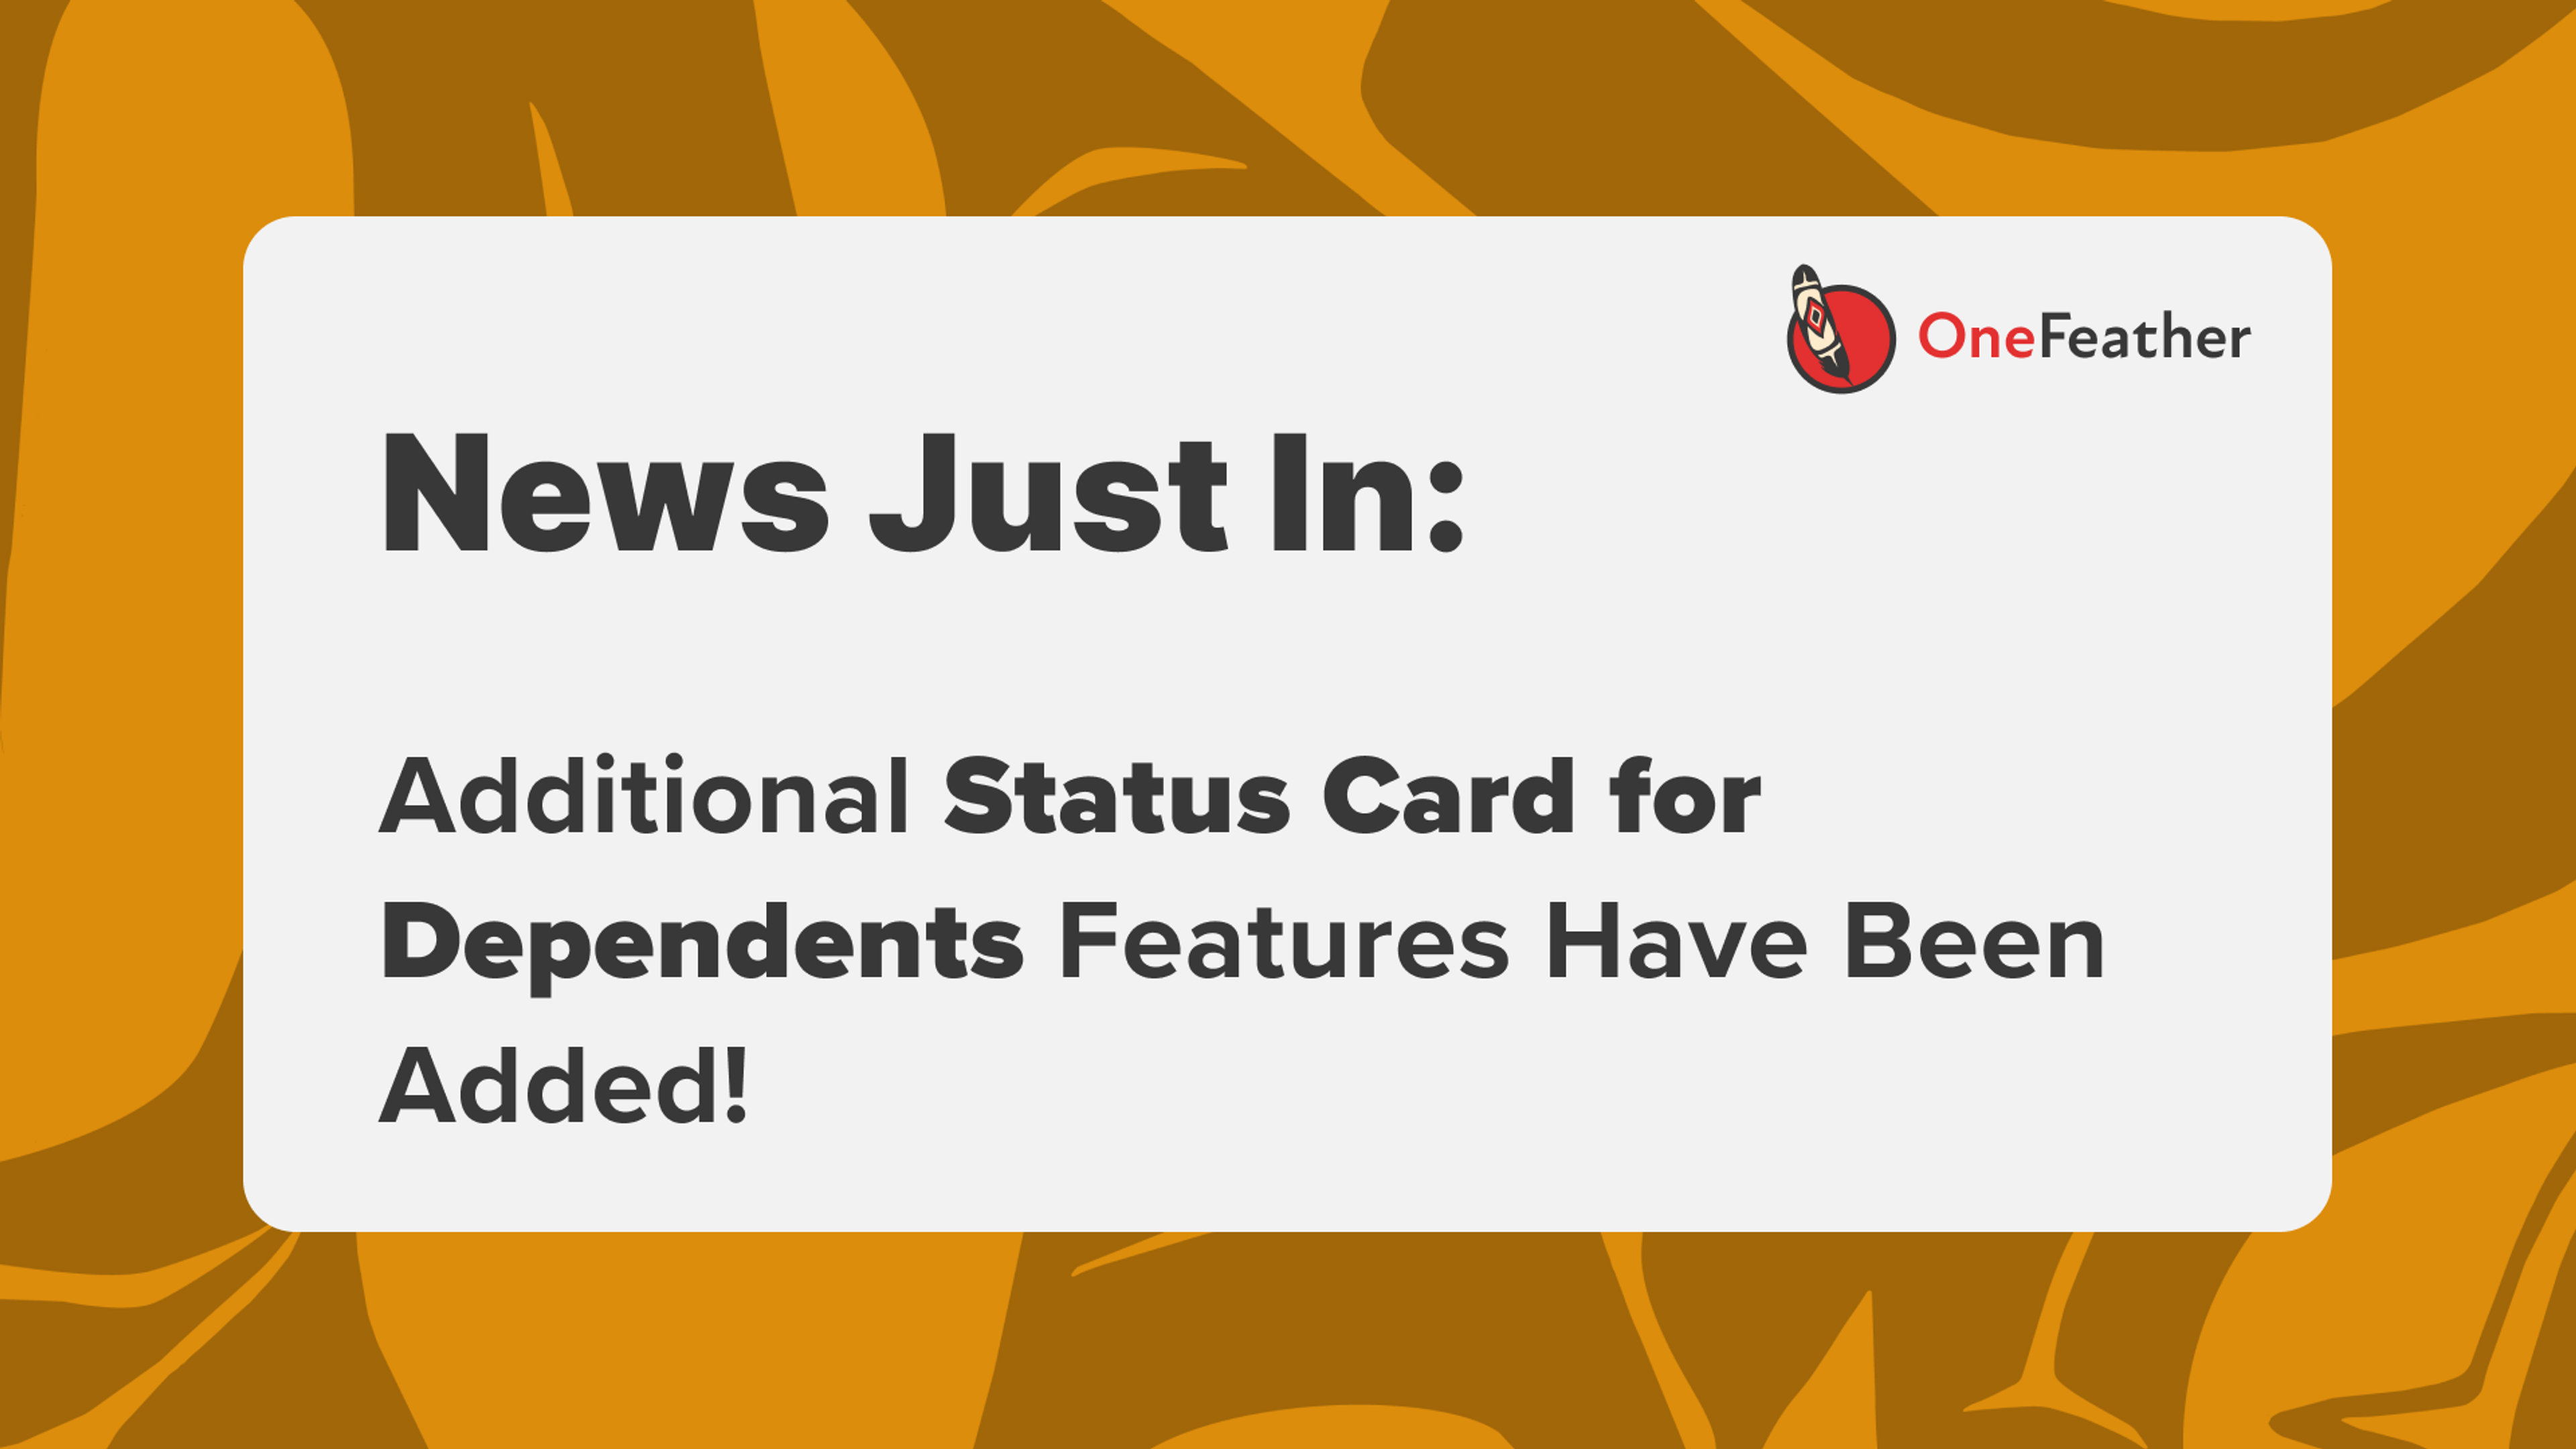 Cover Image for OneFeather Launches More Features to Status Card for Dependents